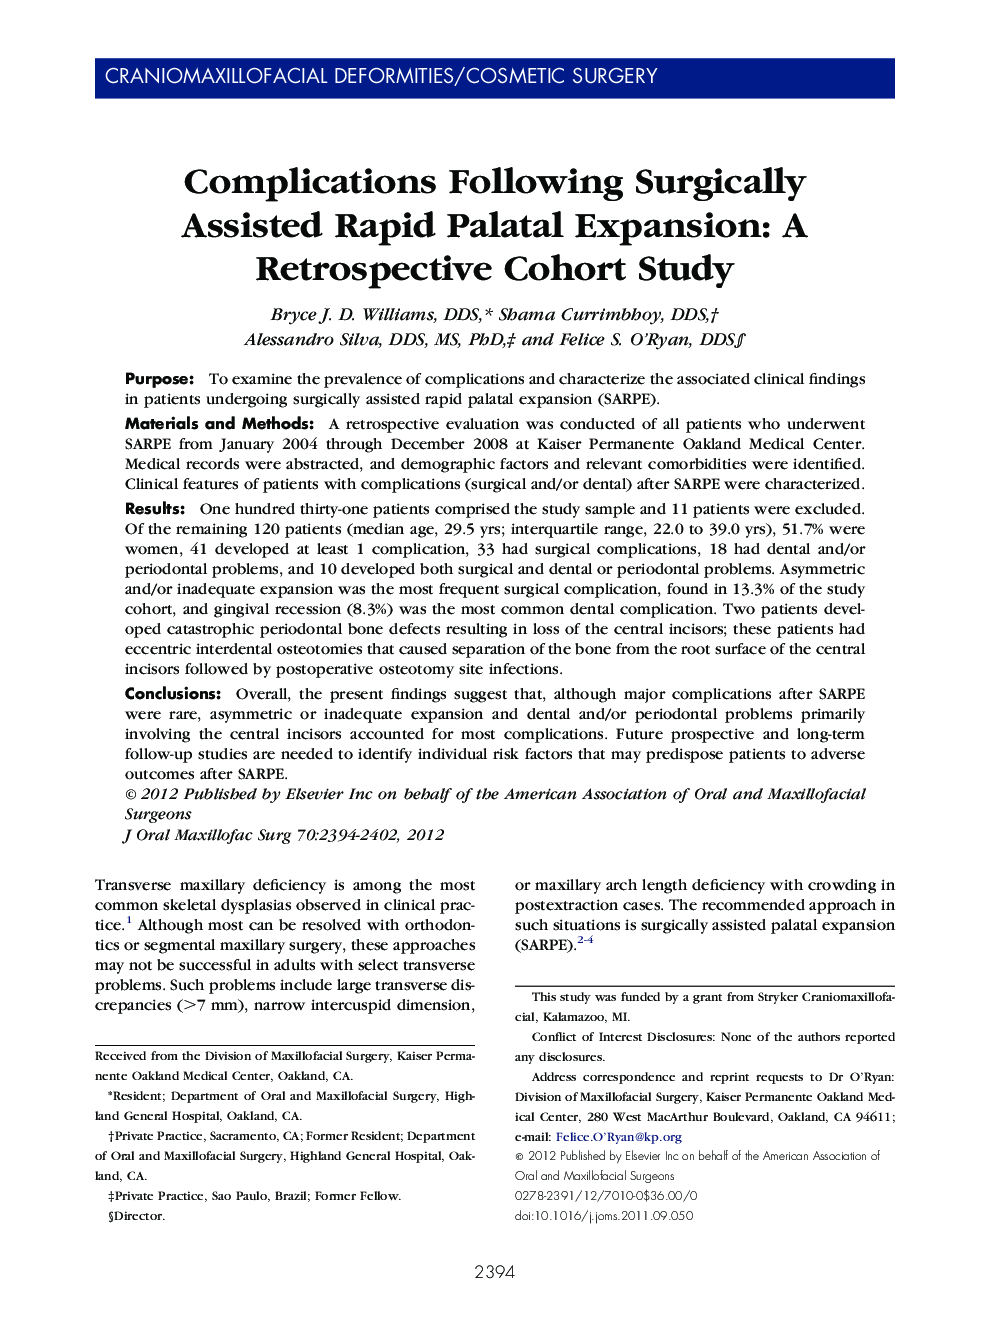 Complications Following Surgically Assisted Rapid Palatal Expansion: A Retrospective Cohort Study 